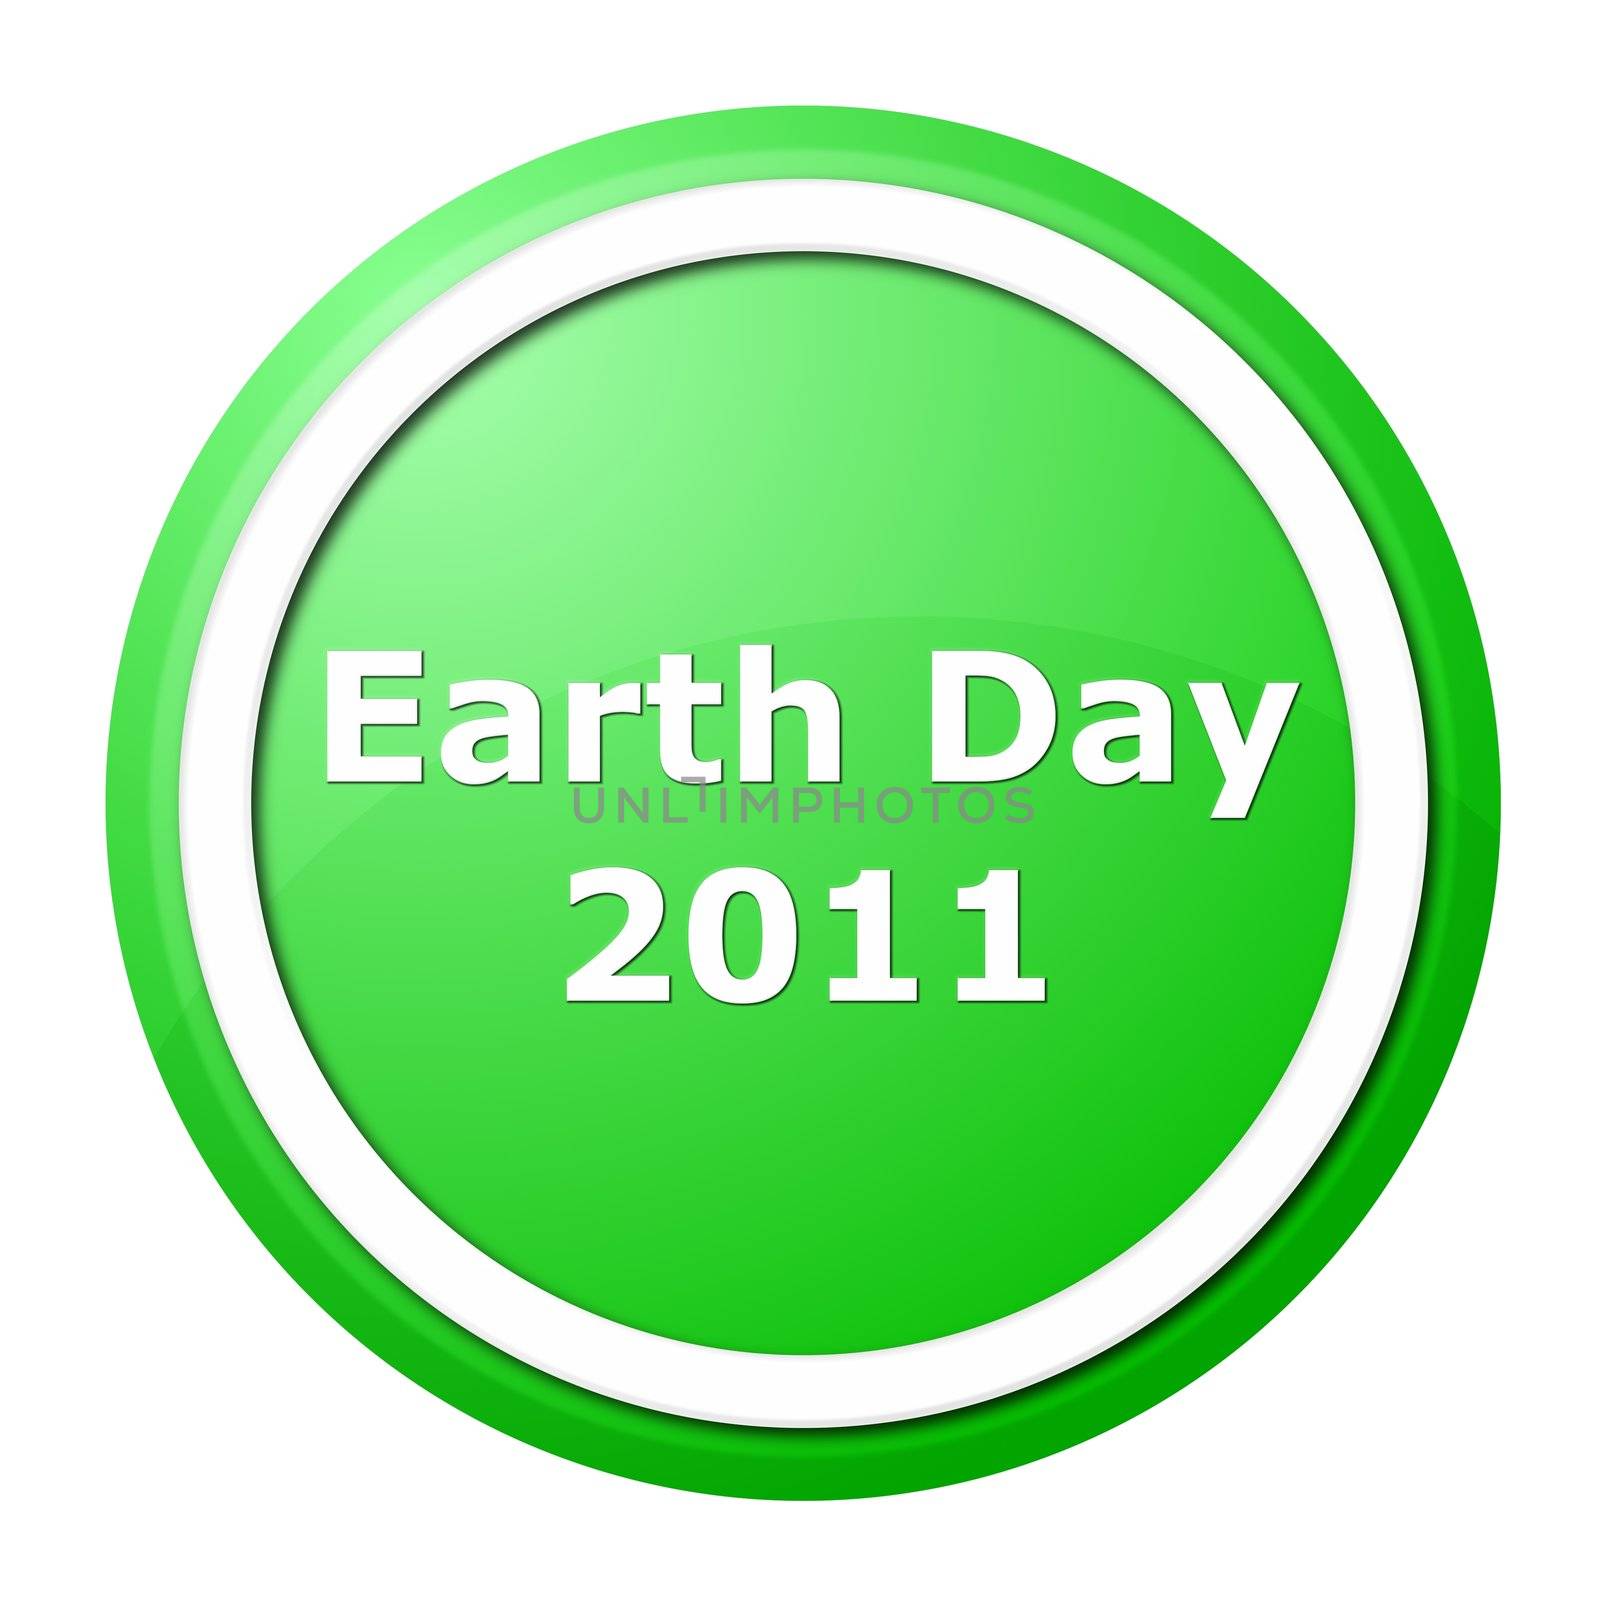 A early event Earth Day for nature and going green.